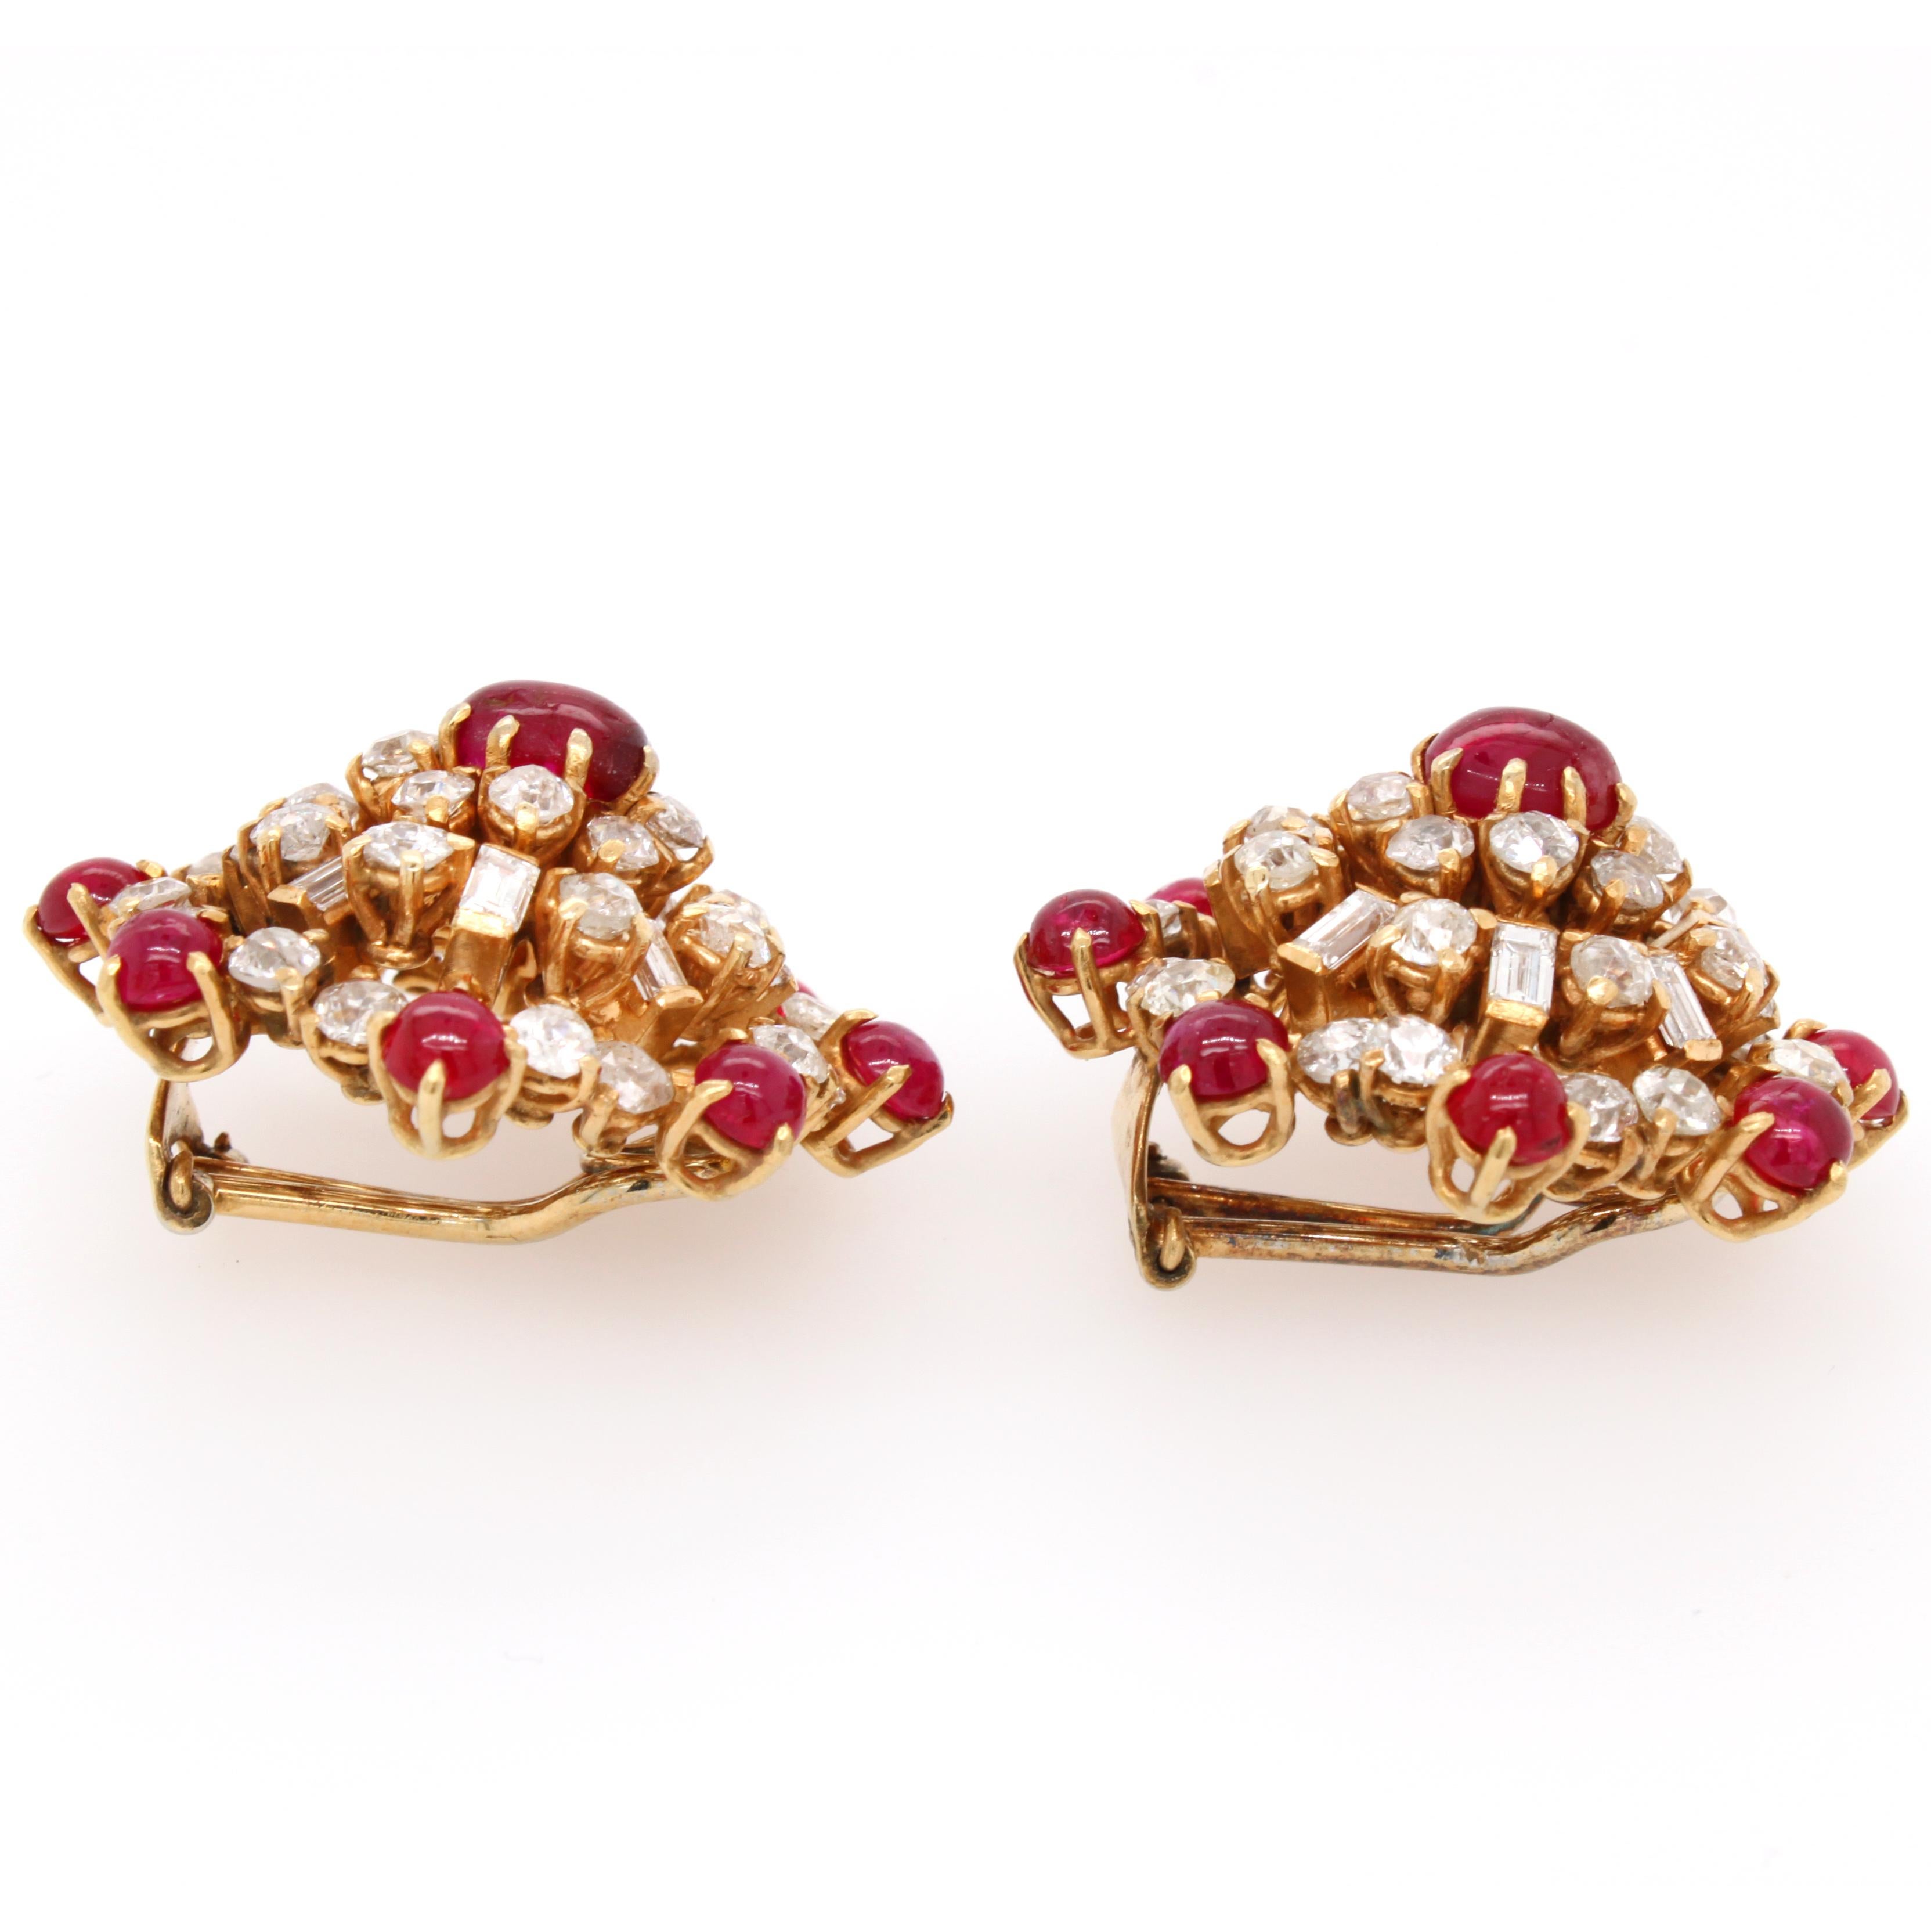 A pair of smart and wearable circular Retro earrings with ruby and diamonds, ca. 1950s. The rubies are cabochon rubies with an intense red colour, weighing approximately 6 carats. The diamonds are old European cut and baguette cut diamonds, weighing